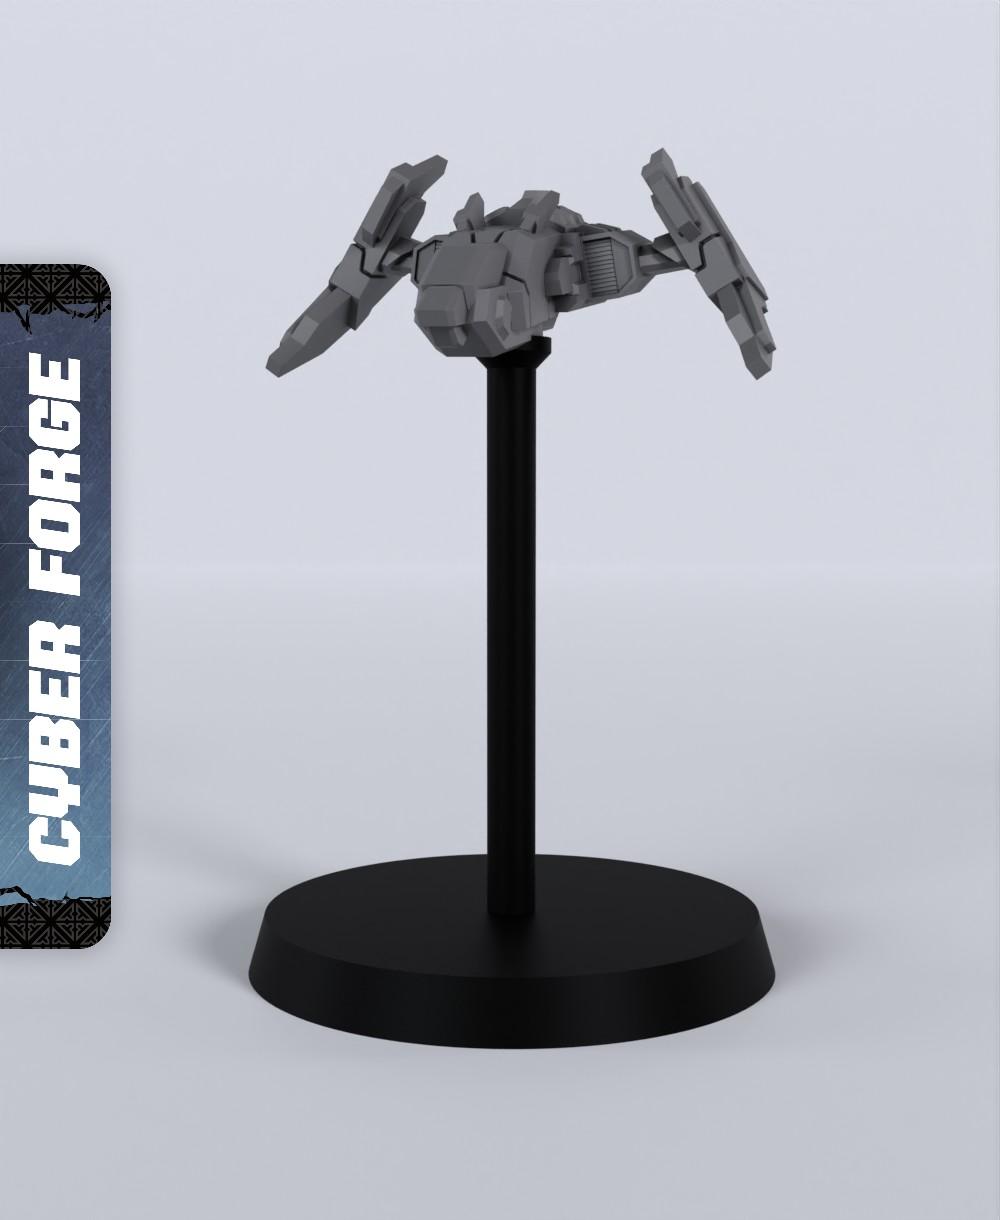 Tornado - With Free Cyberpunk Warhammer - 40k Sci-Fi Gift Ideas for RPG and Wargamers 3d model